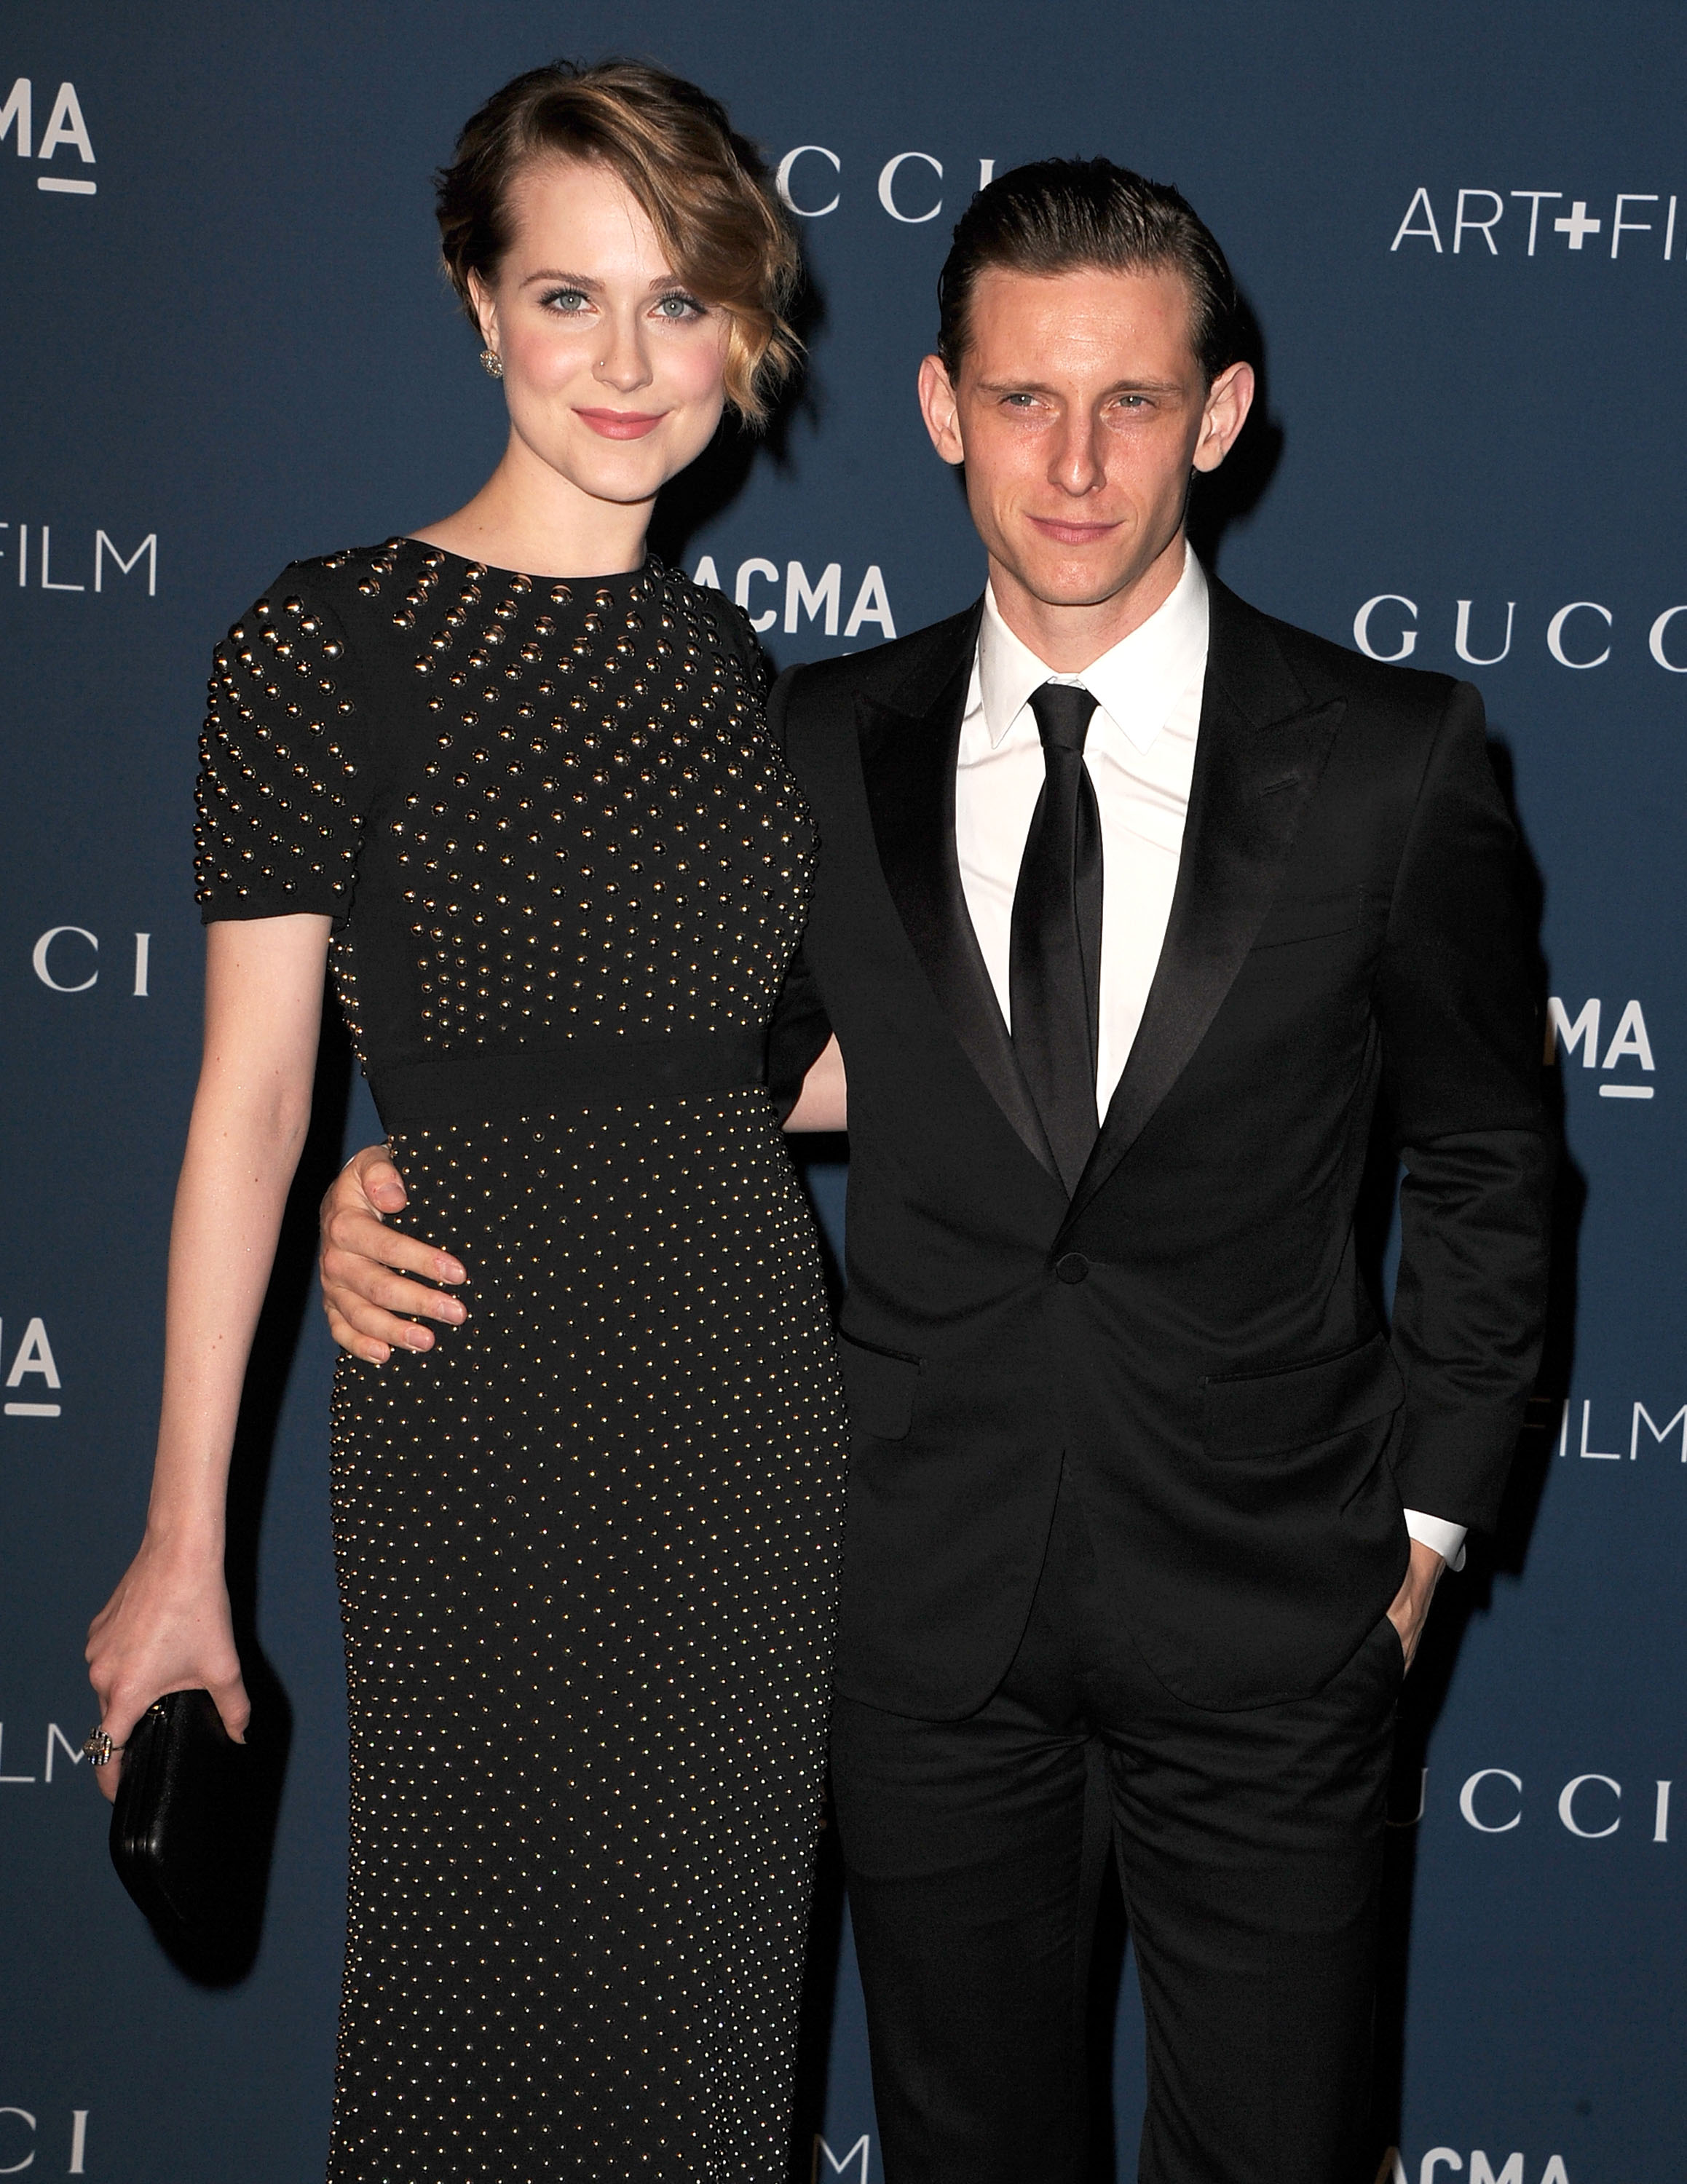 Actress Evan Rachel Wood and her husband Jamie Bell arrive at the LACMA 2013 Art + Film Gala at LACMA on November 2, 2013 in Los Angeles, California | Source: Getty Images